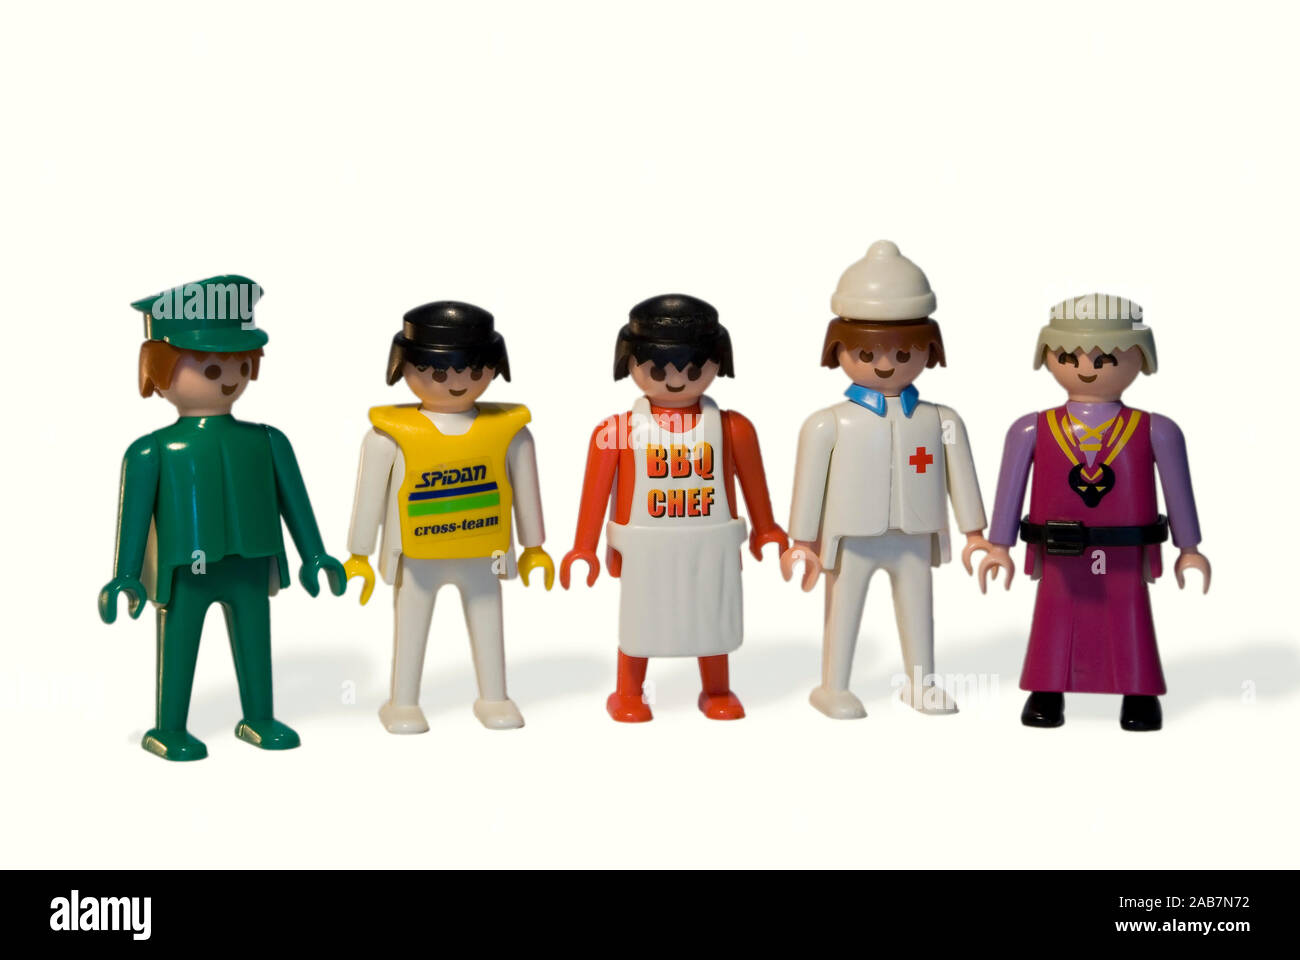 Playmobil figures representing different occupations Stock Photo